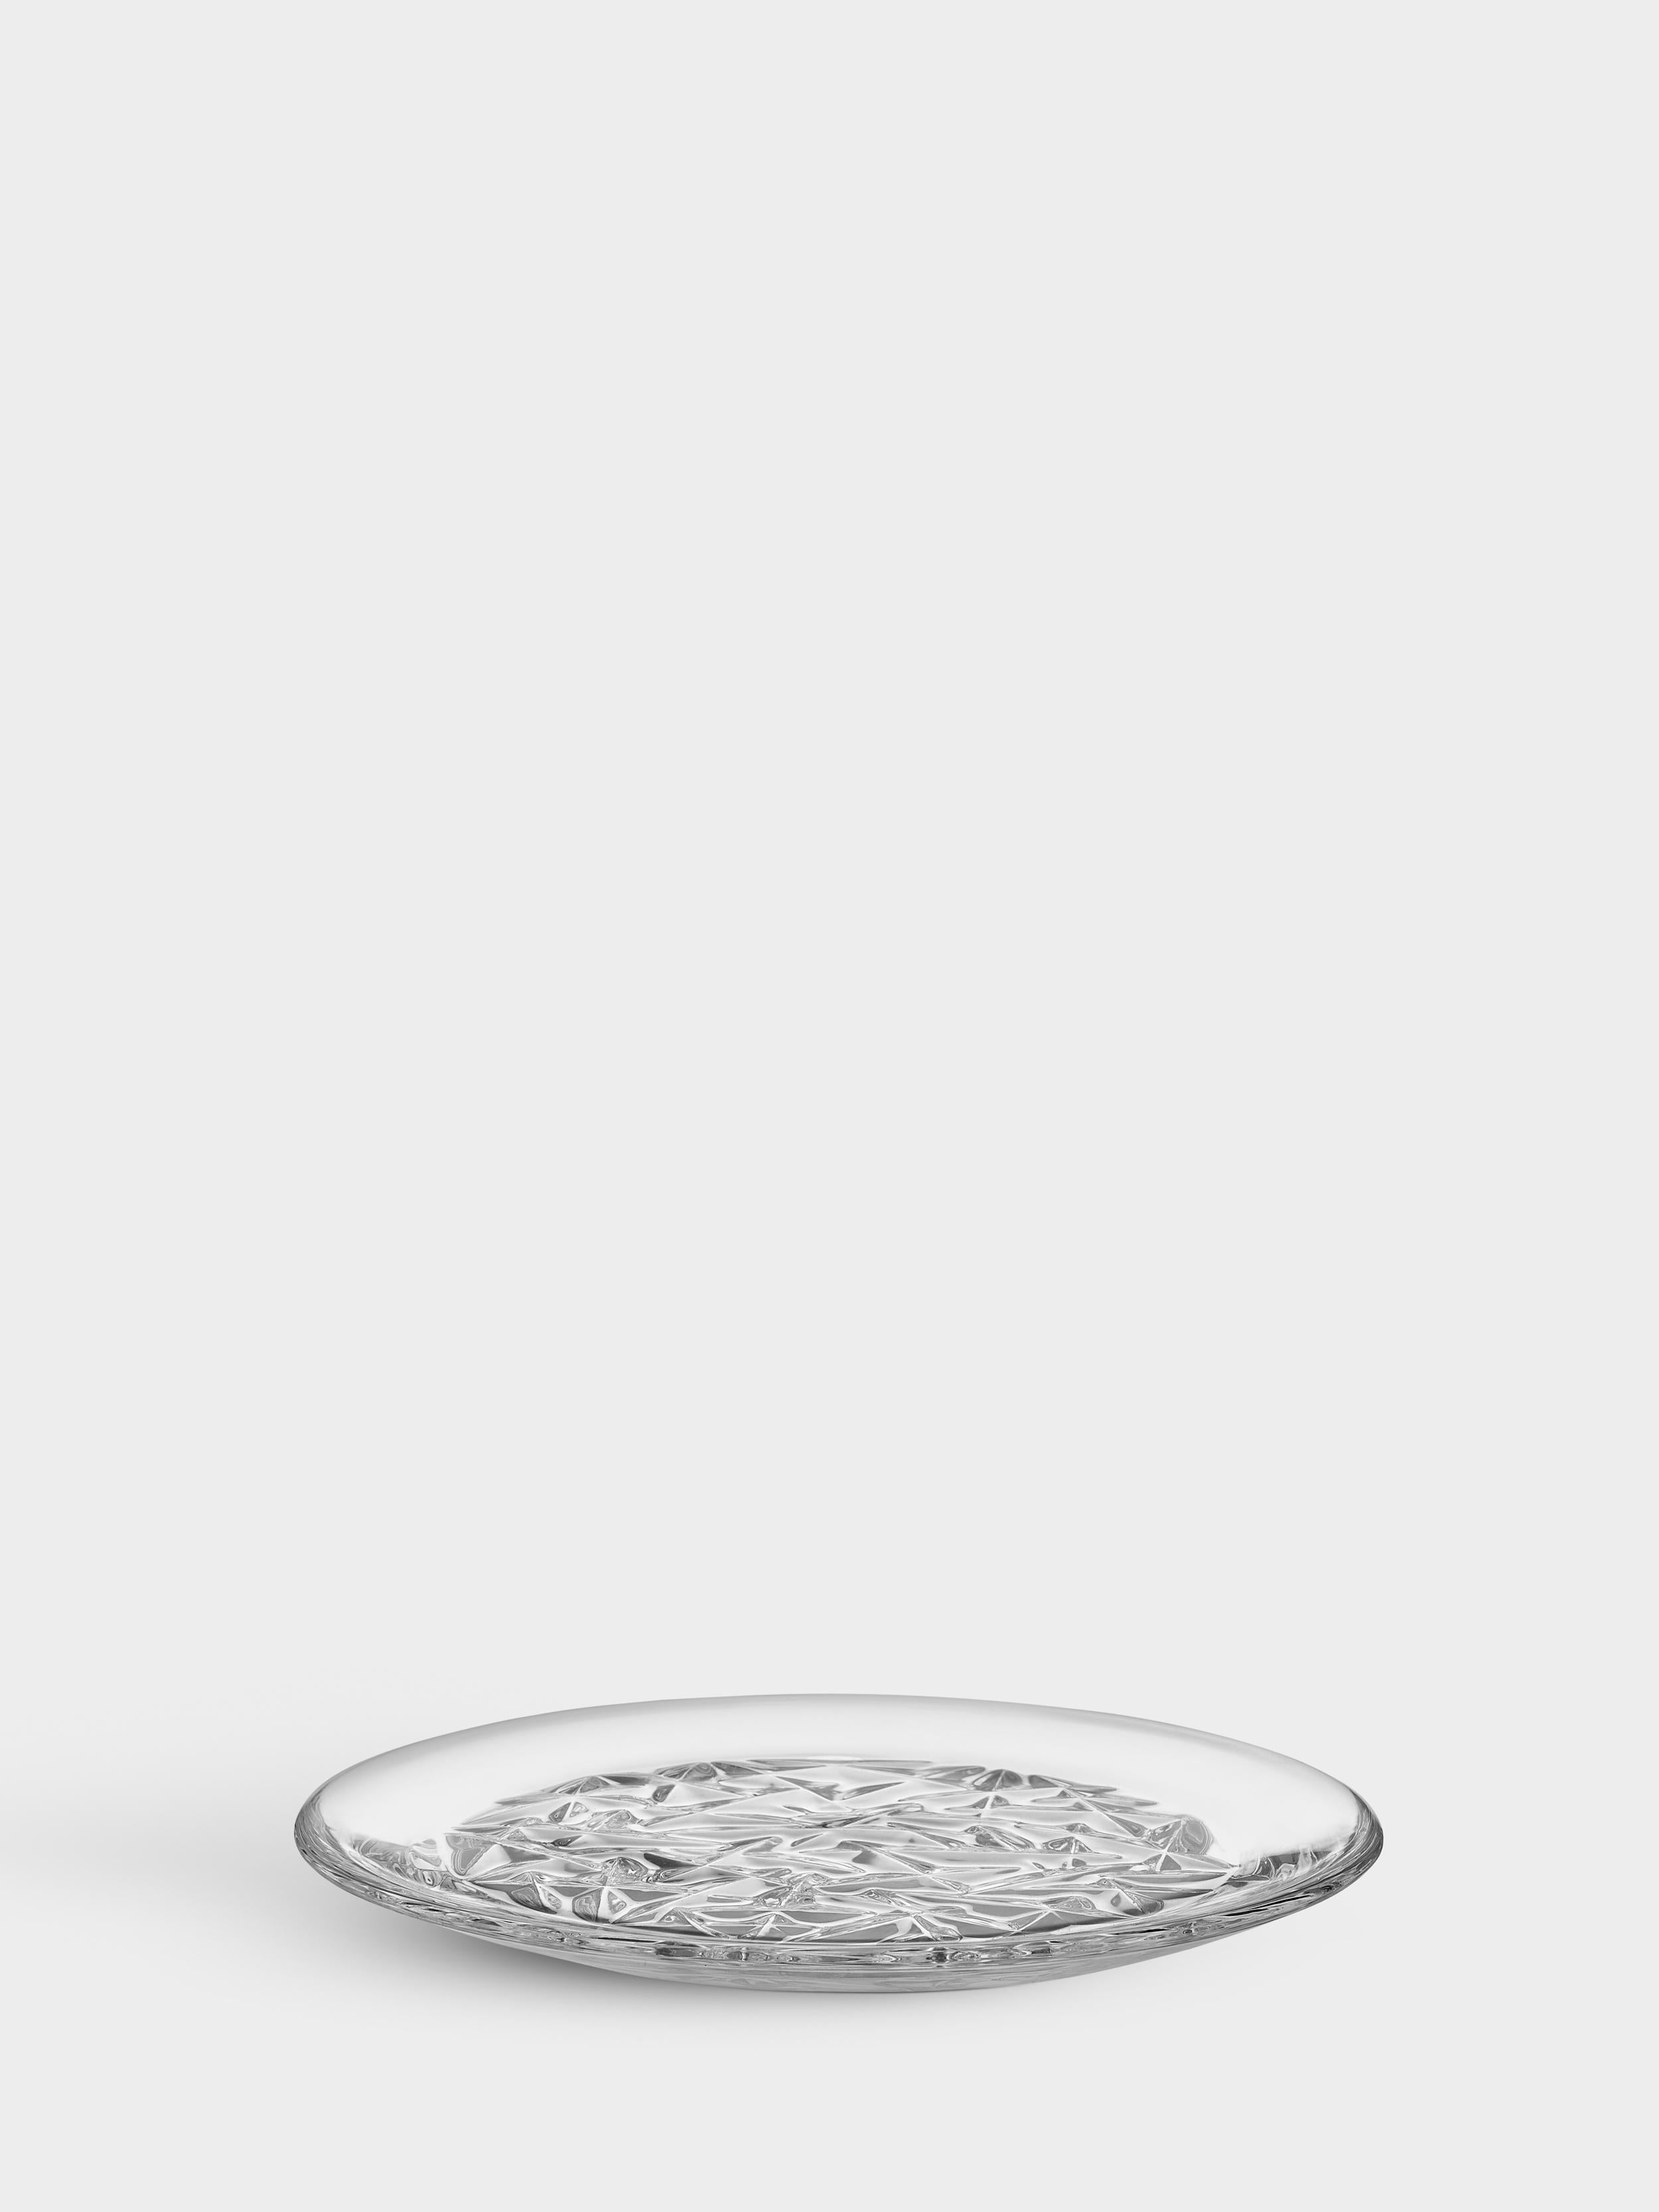 The Carat collection is based on a contemporary interpretation of the traditional cut glass for which Orrefors is world-renowned. The irregular geometry produces beautiful reflections of light in the crystal. Use the side plate as a serving dish for